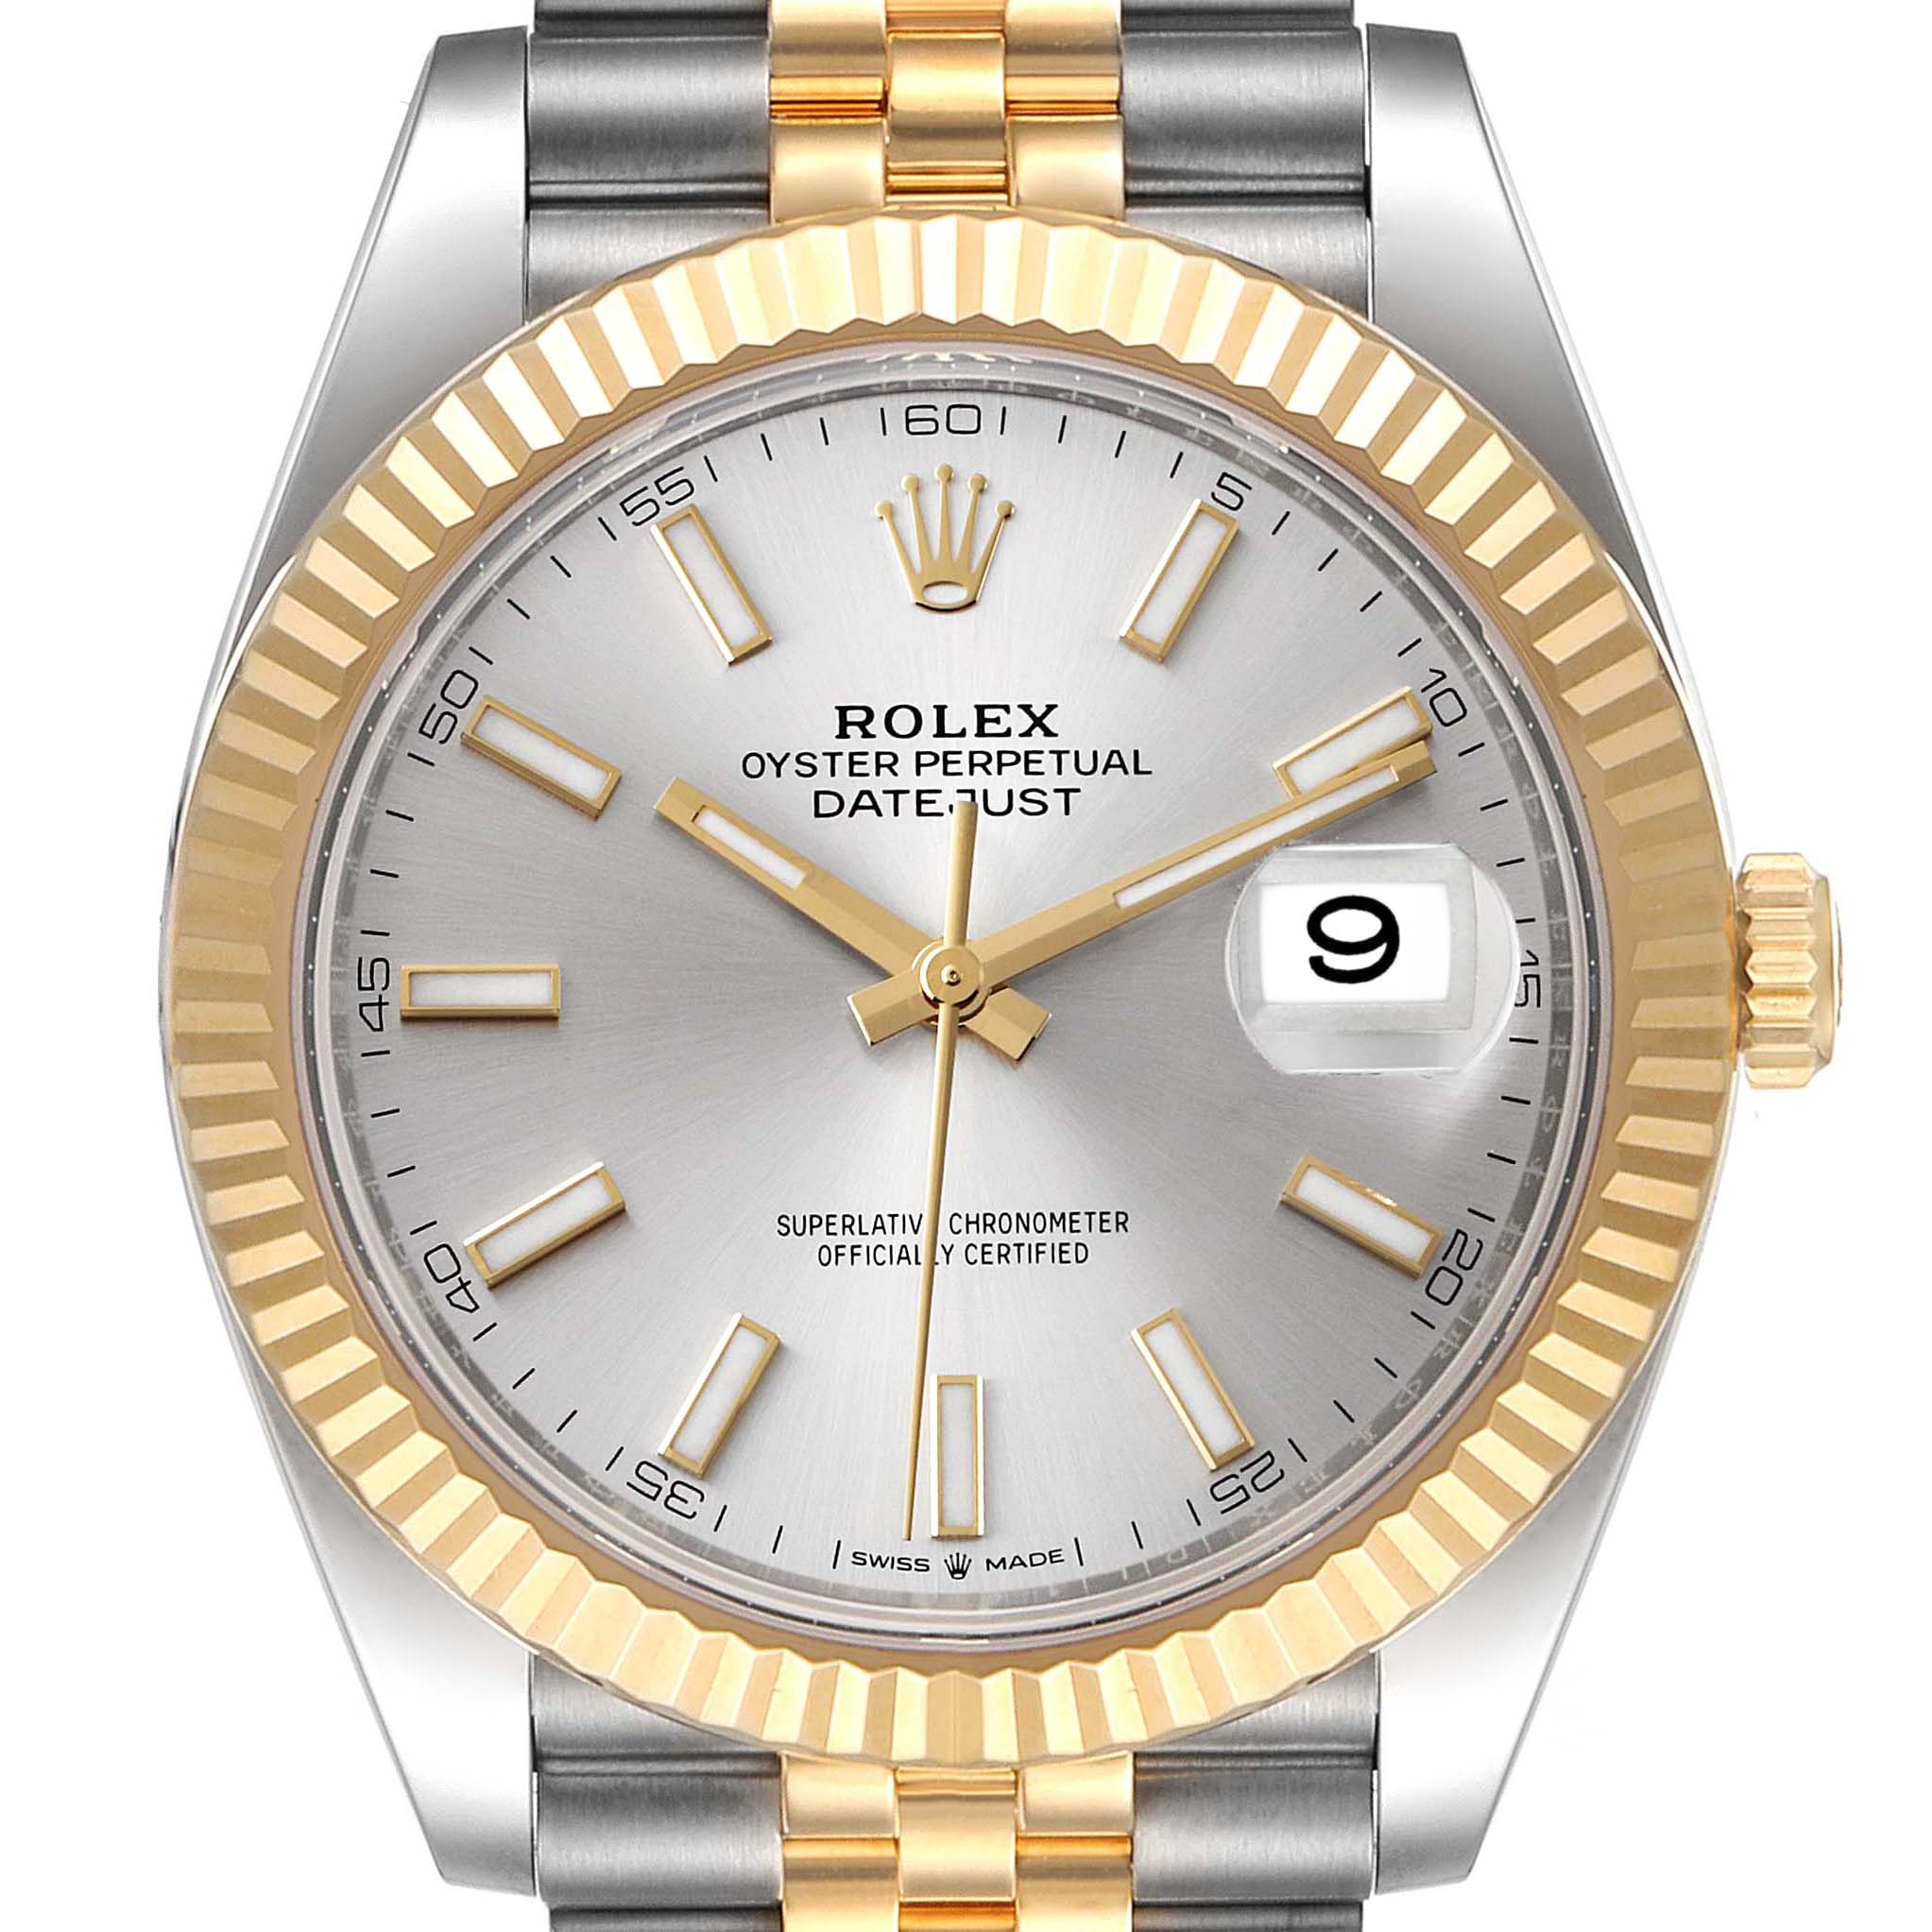 36mm Mens Diamond Rolex Oyster Perpetual Datejust 18K Gold & Stainless  Steel Watch 968374